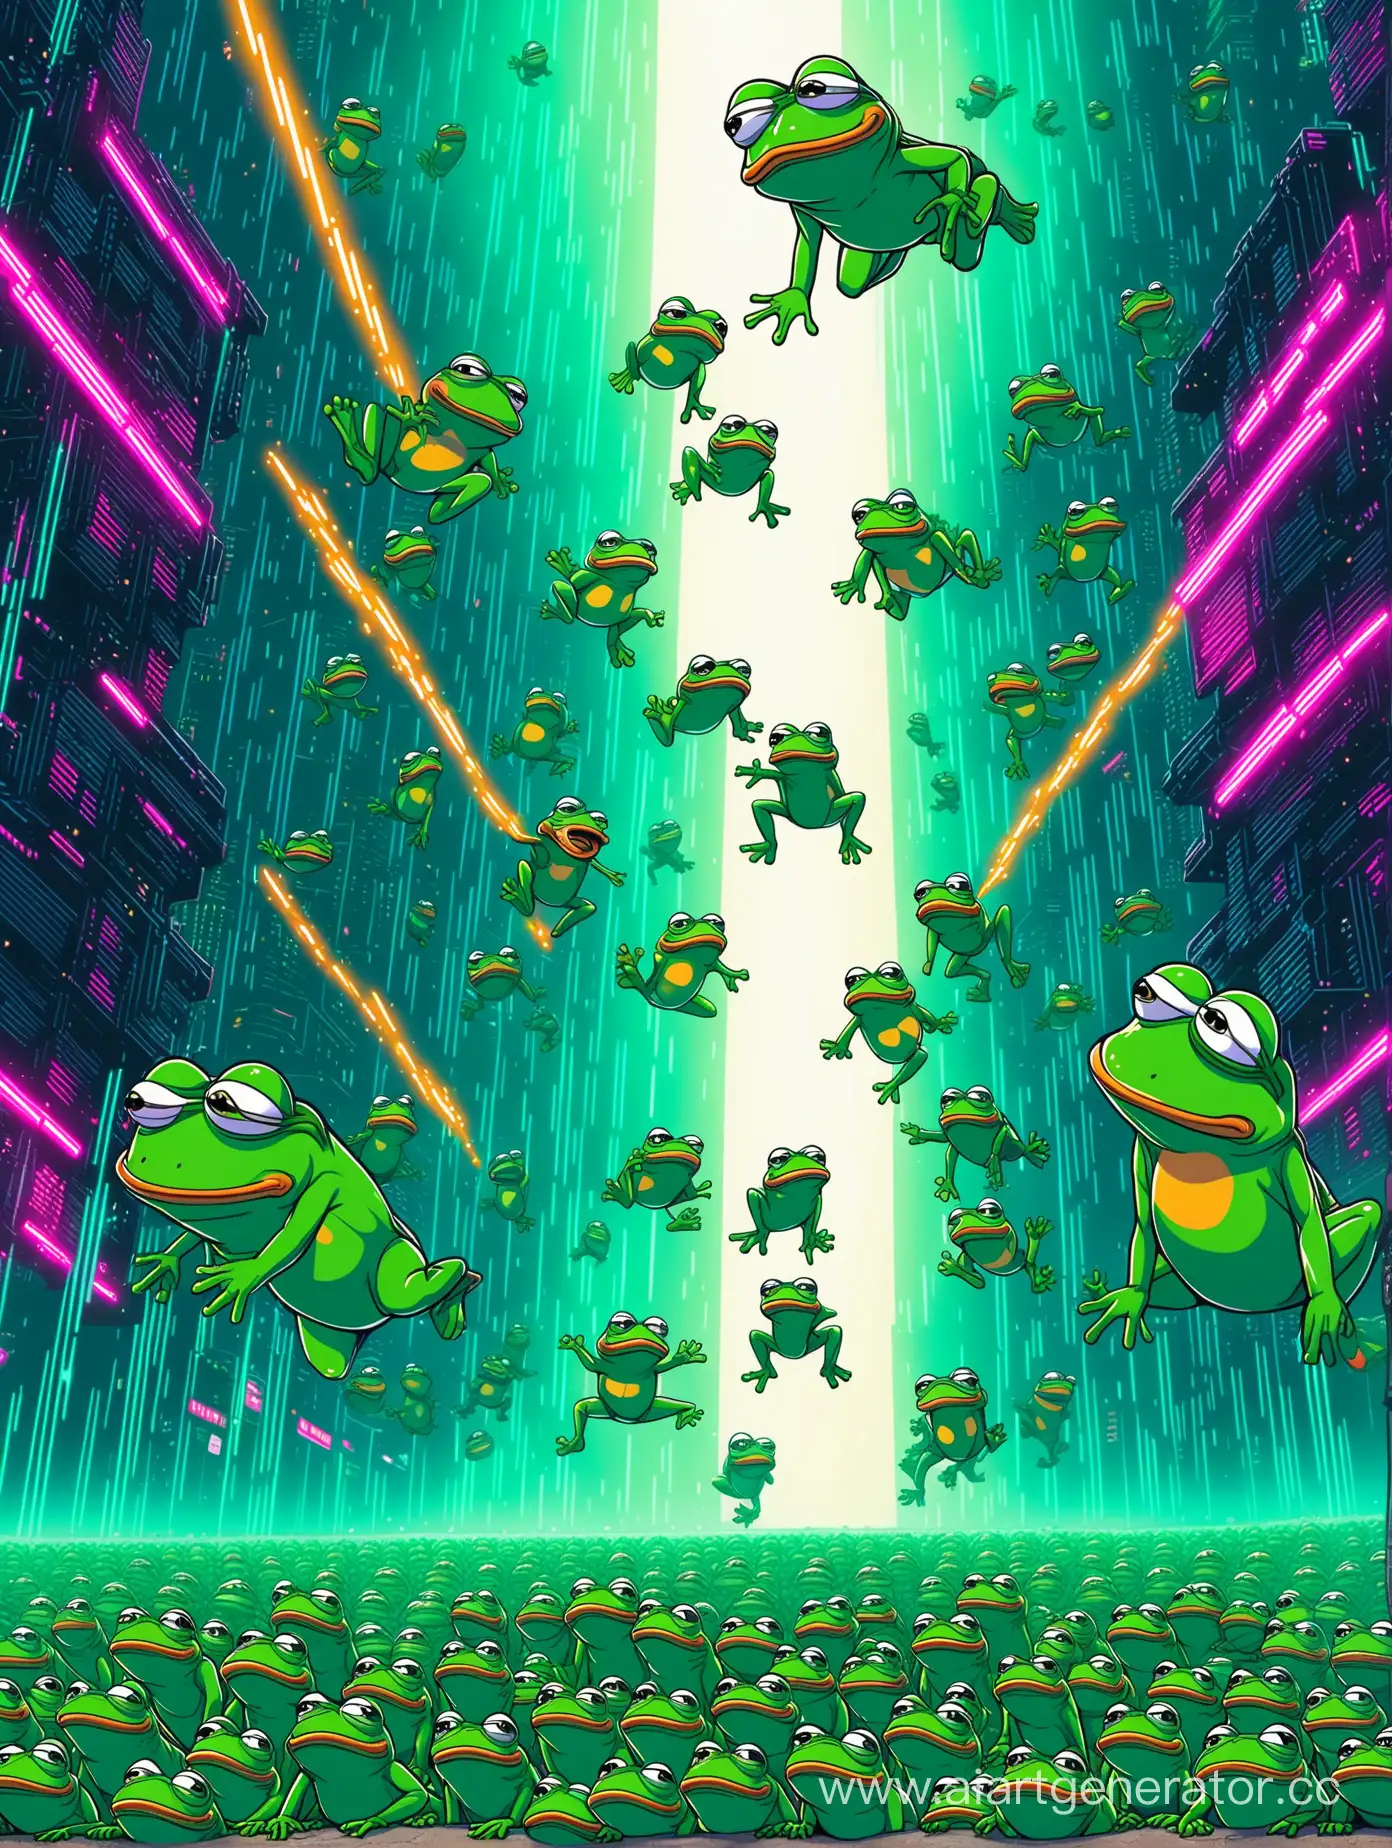 Cyberpunk-Style-Pepe-Frogs-Descending-from-the-Sky